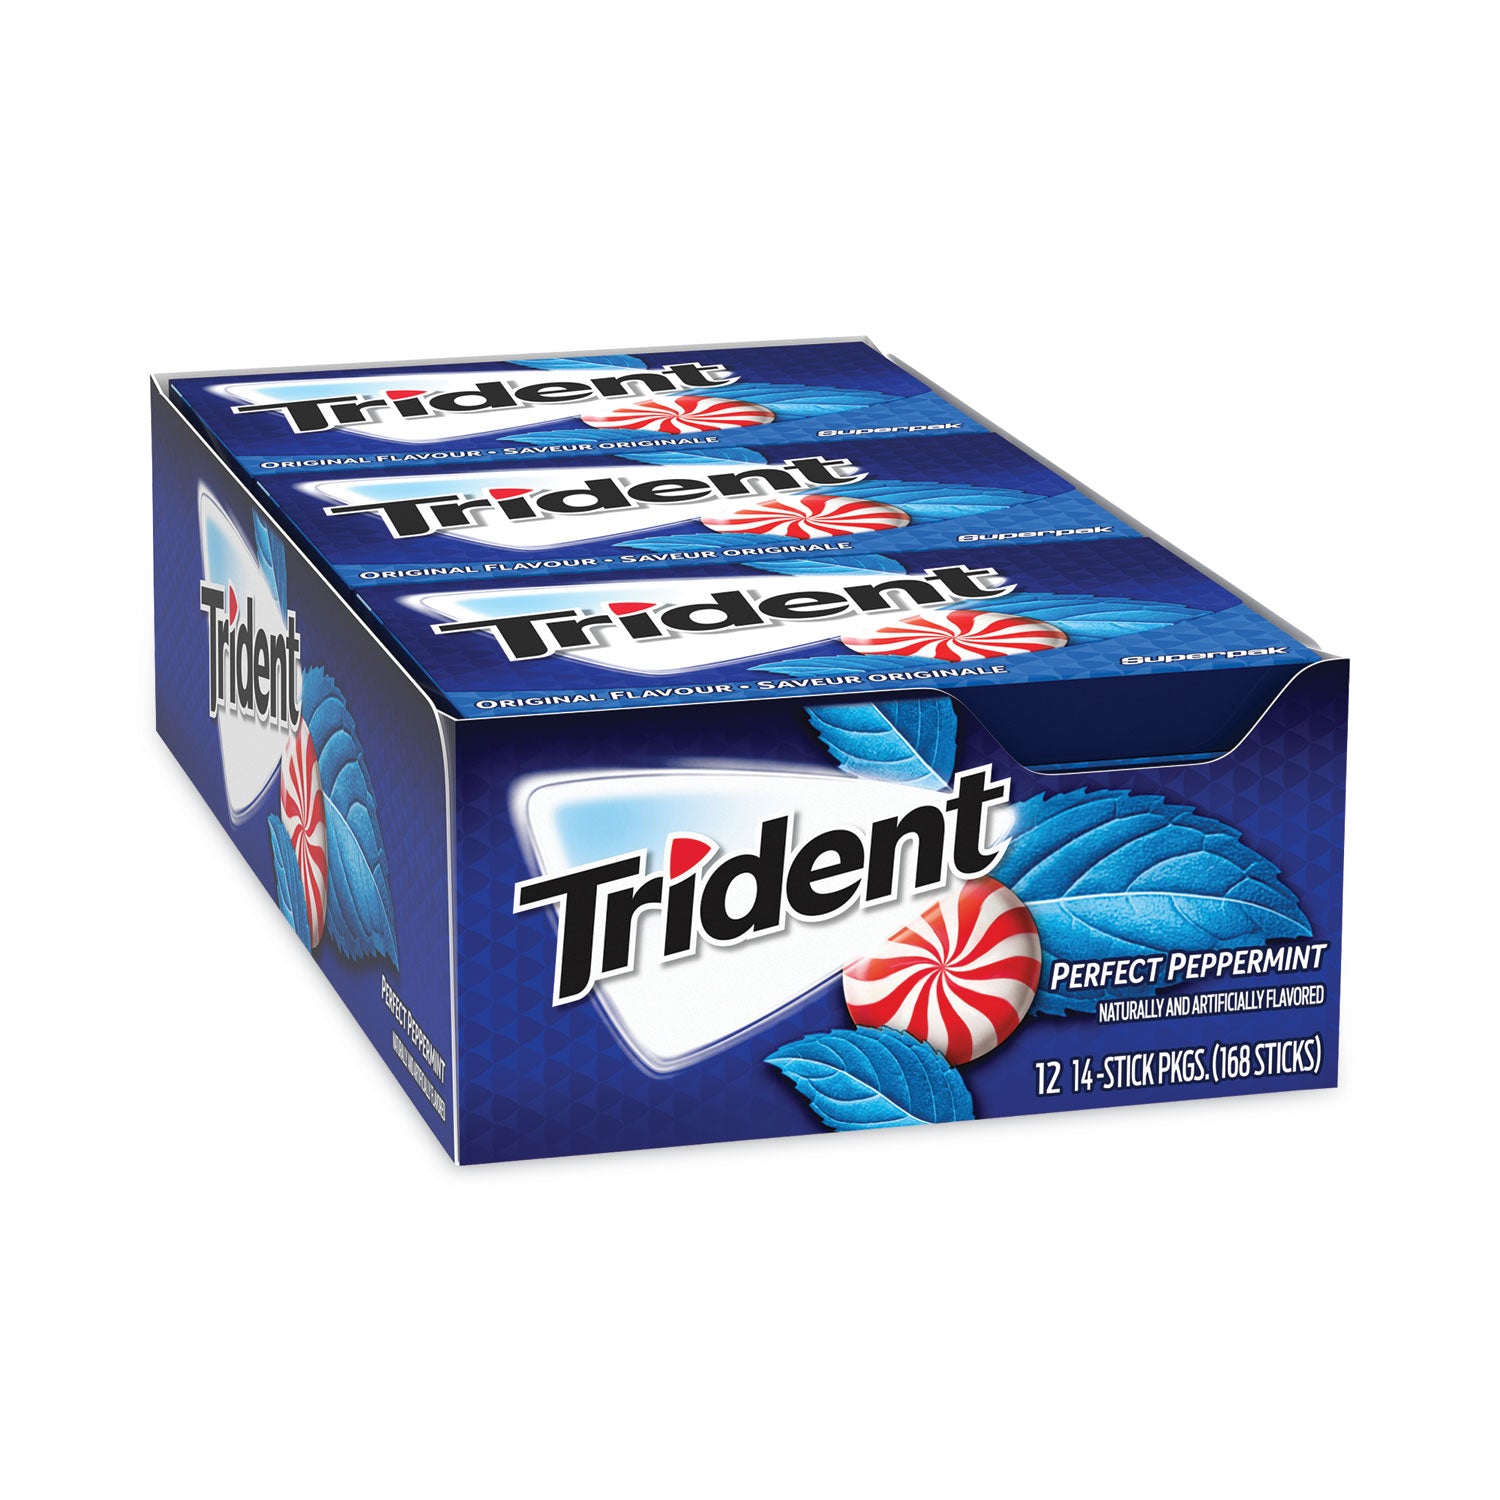 sugar-free-gum-perfect-peppermint-14-pieces-pack-12-packs-carton-ships-in-1-3-business-days_grr20902517 - 2